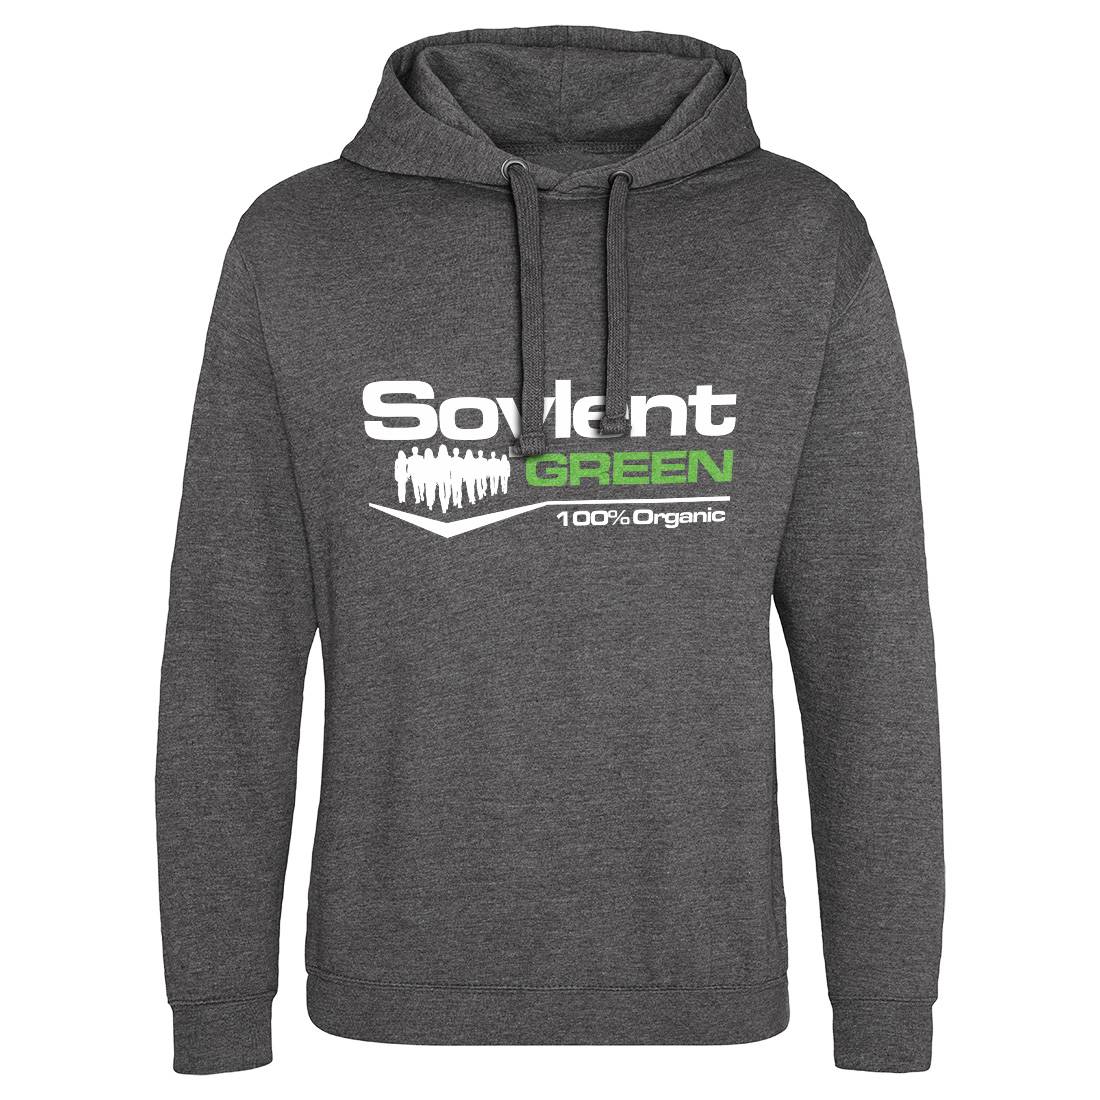 Soylent Green Mens Hoodie Without Pocket Horror D410